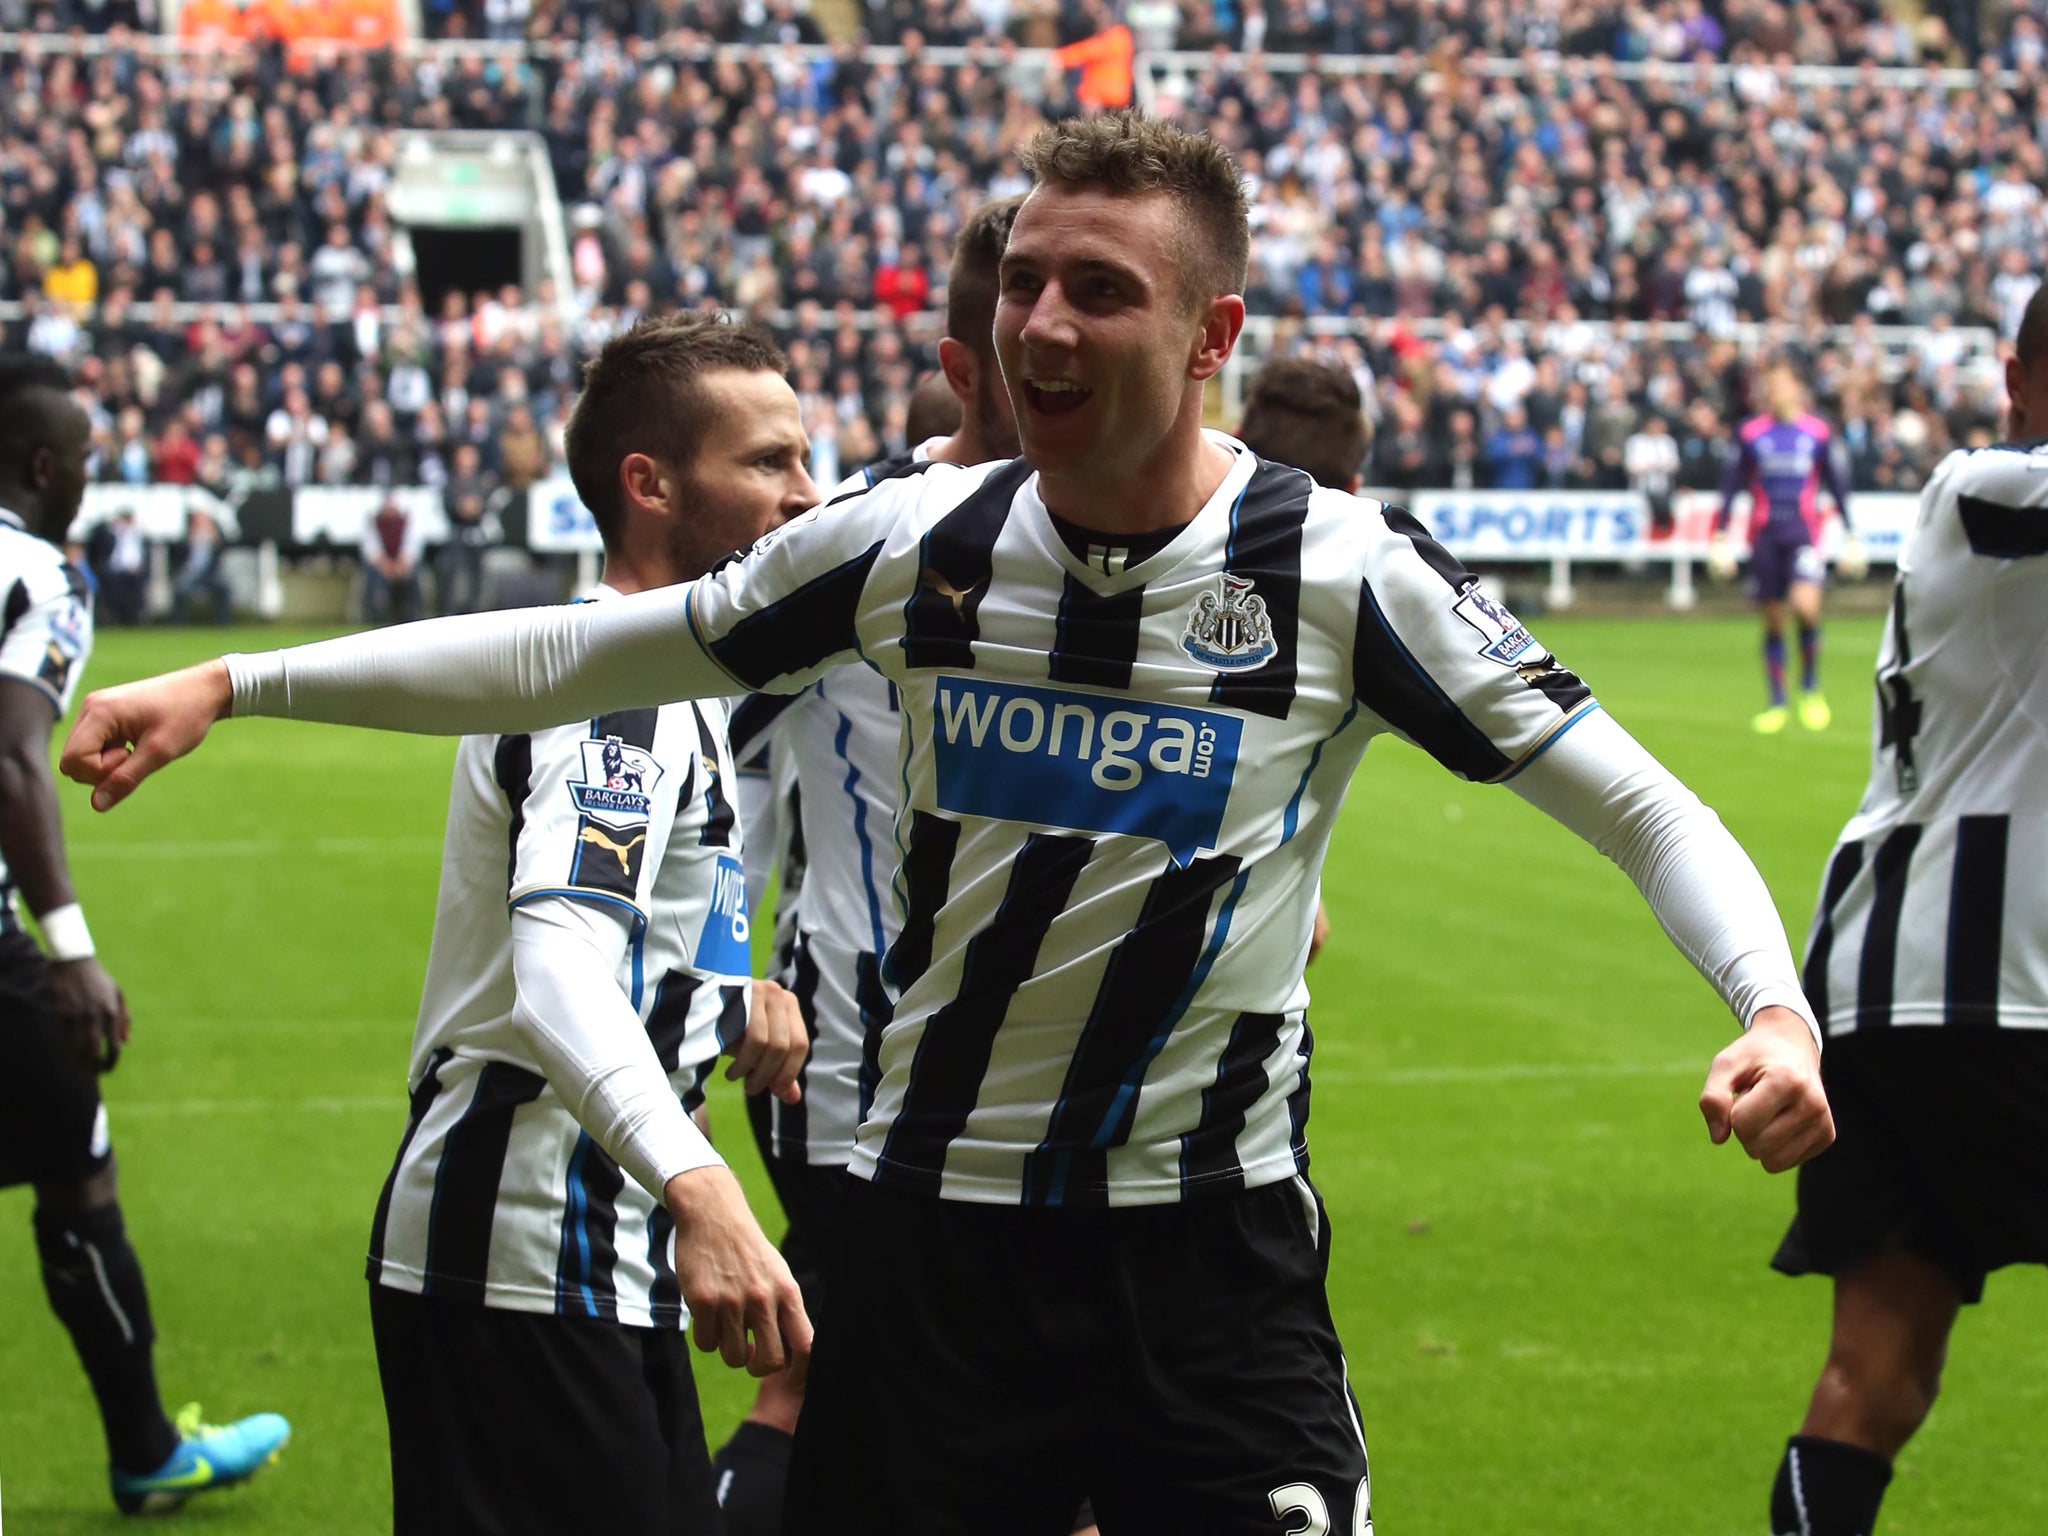 Newcastle defender Paul Dummett has been given a new six-year contract after his goal against Liverpool